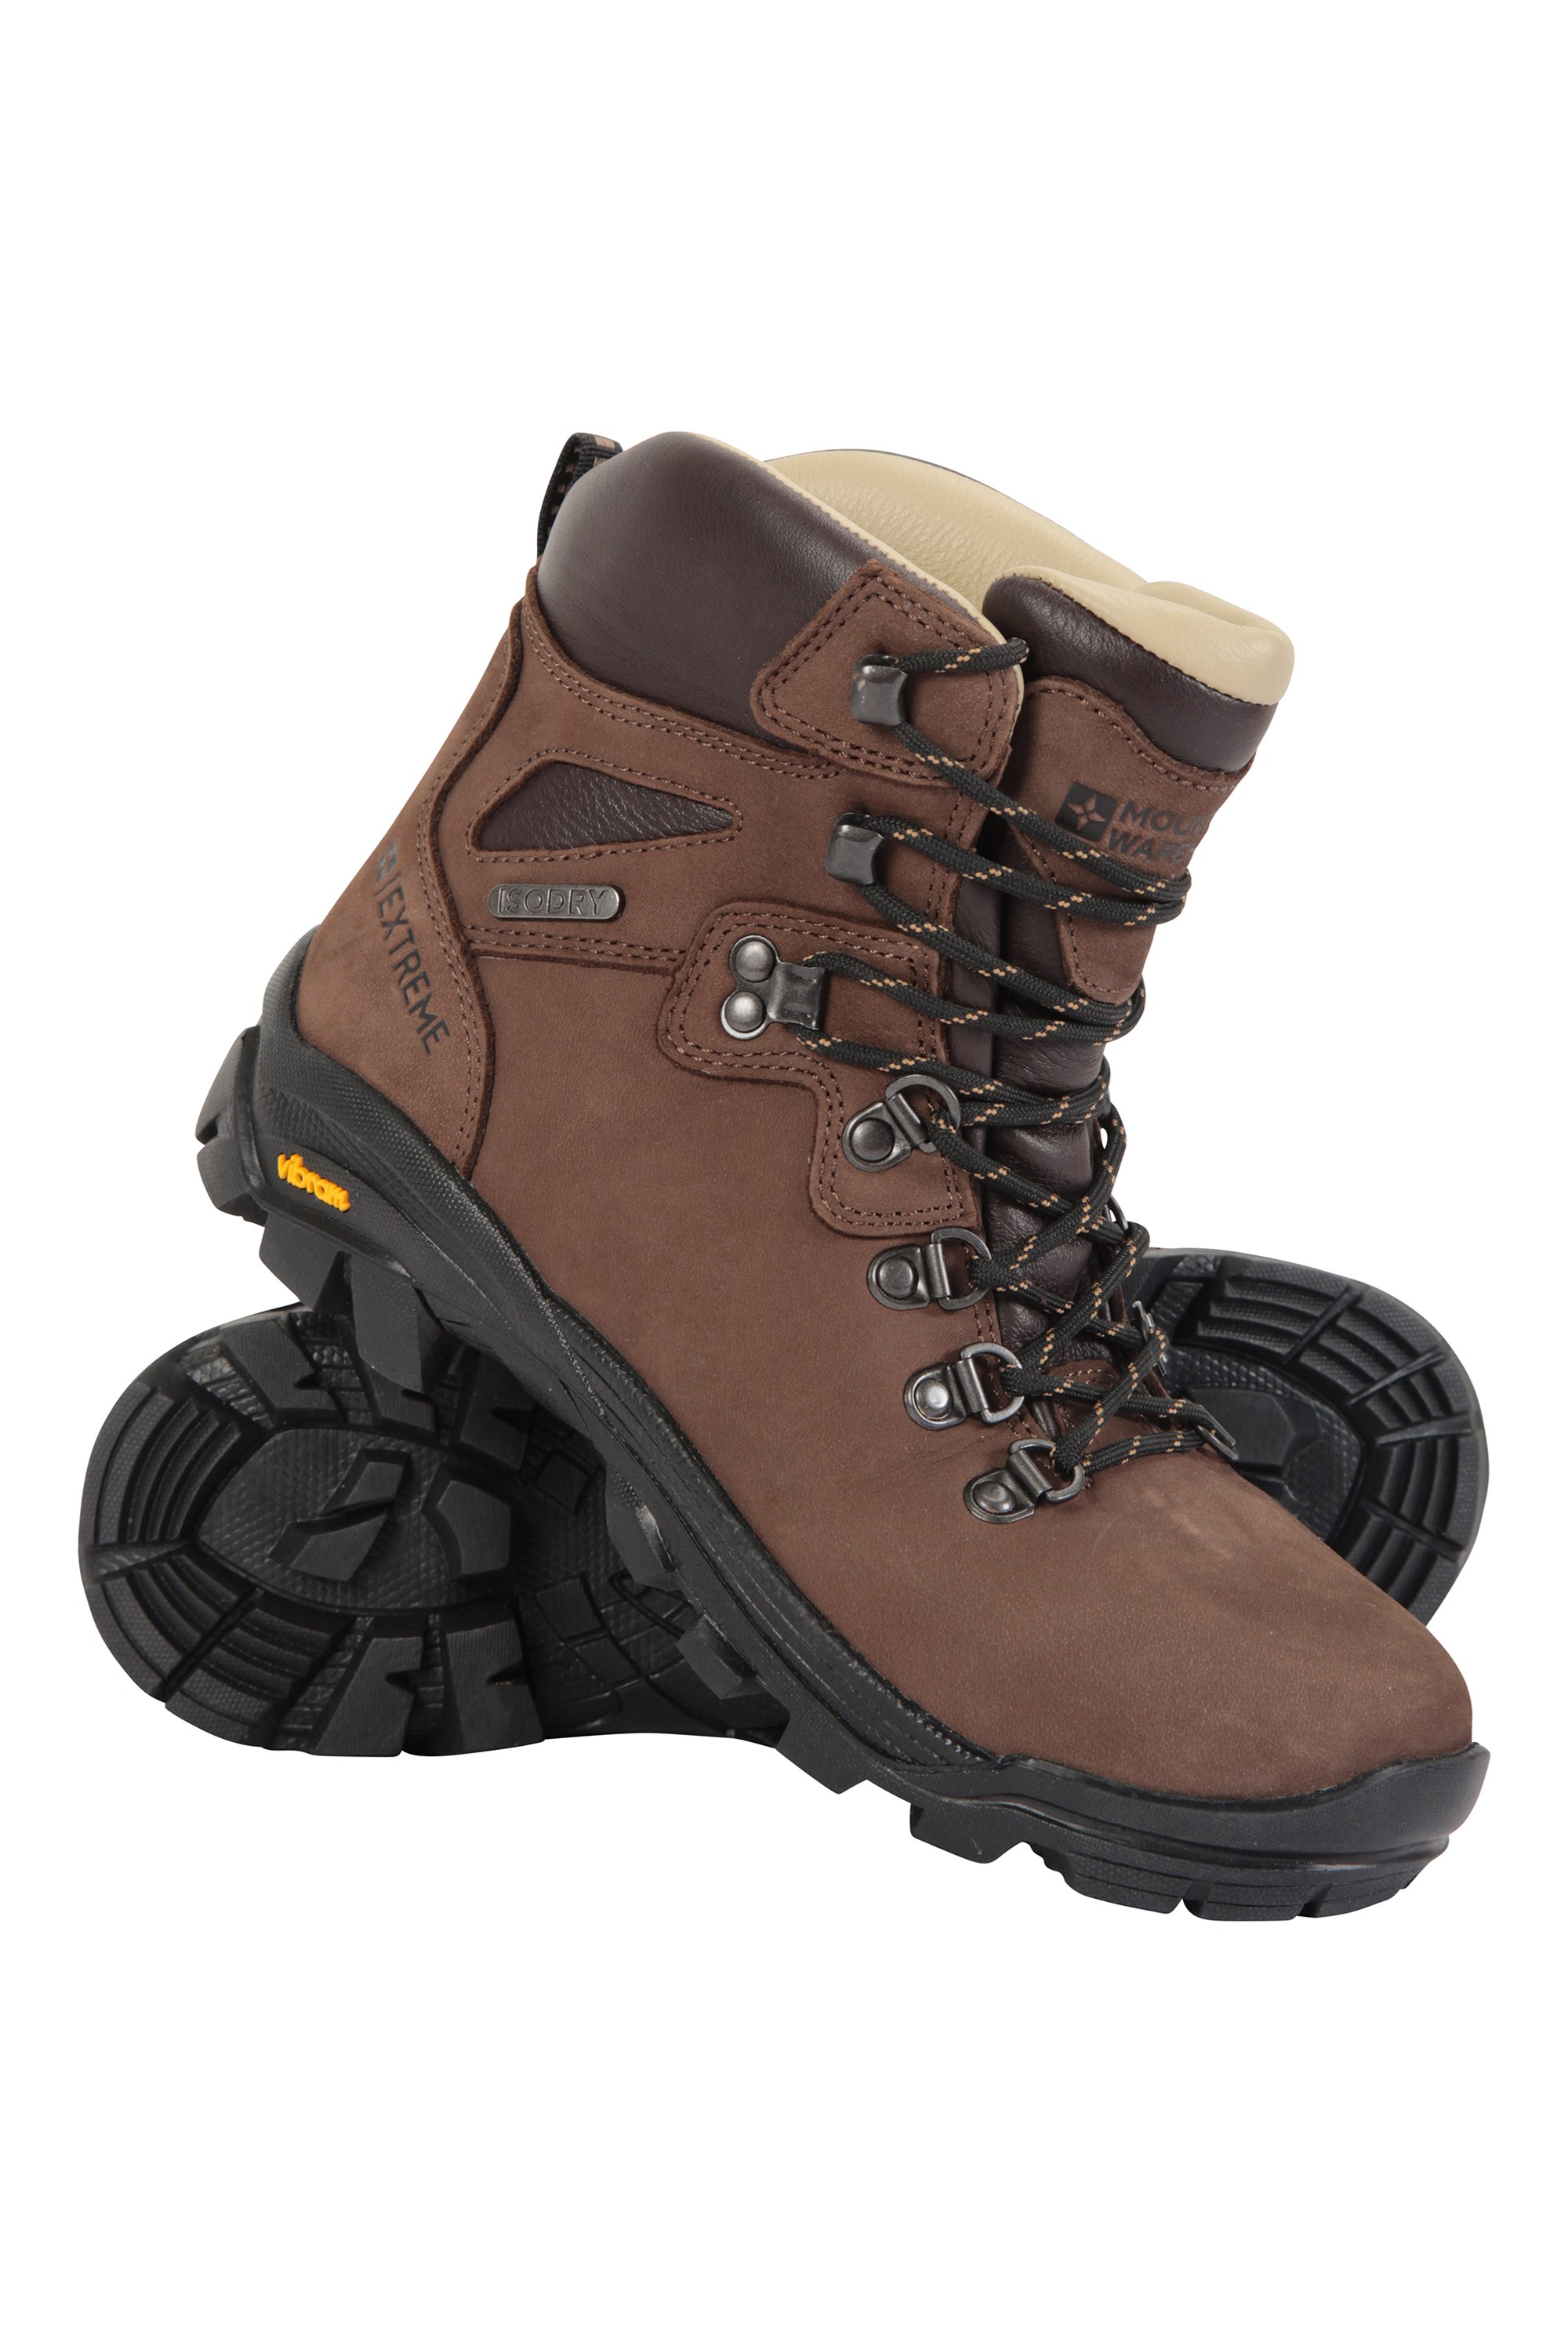 Odyssey Extreme Mens Vibram Waterproof Hiking Boots